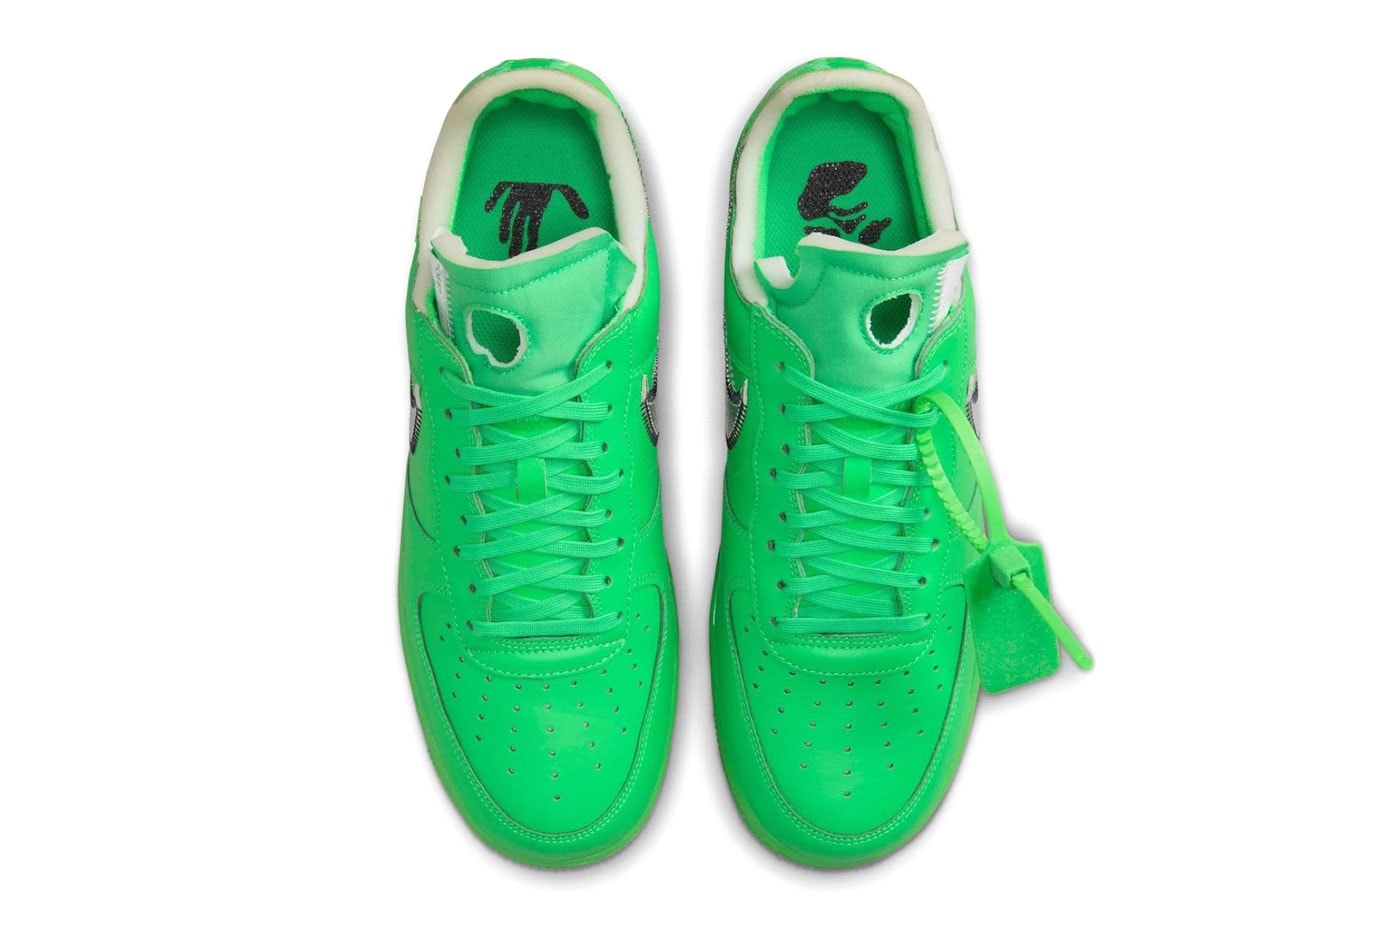 Off-White™ Nike Air Force 1 Low Light Green Spark Official Look Release Info DX1419-300 Date Buy Price 